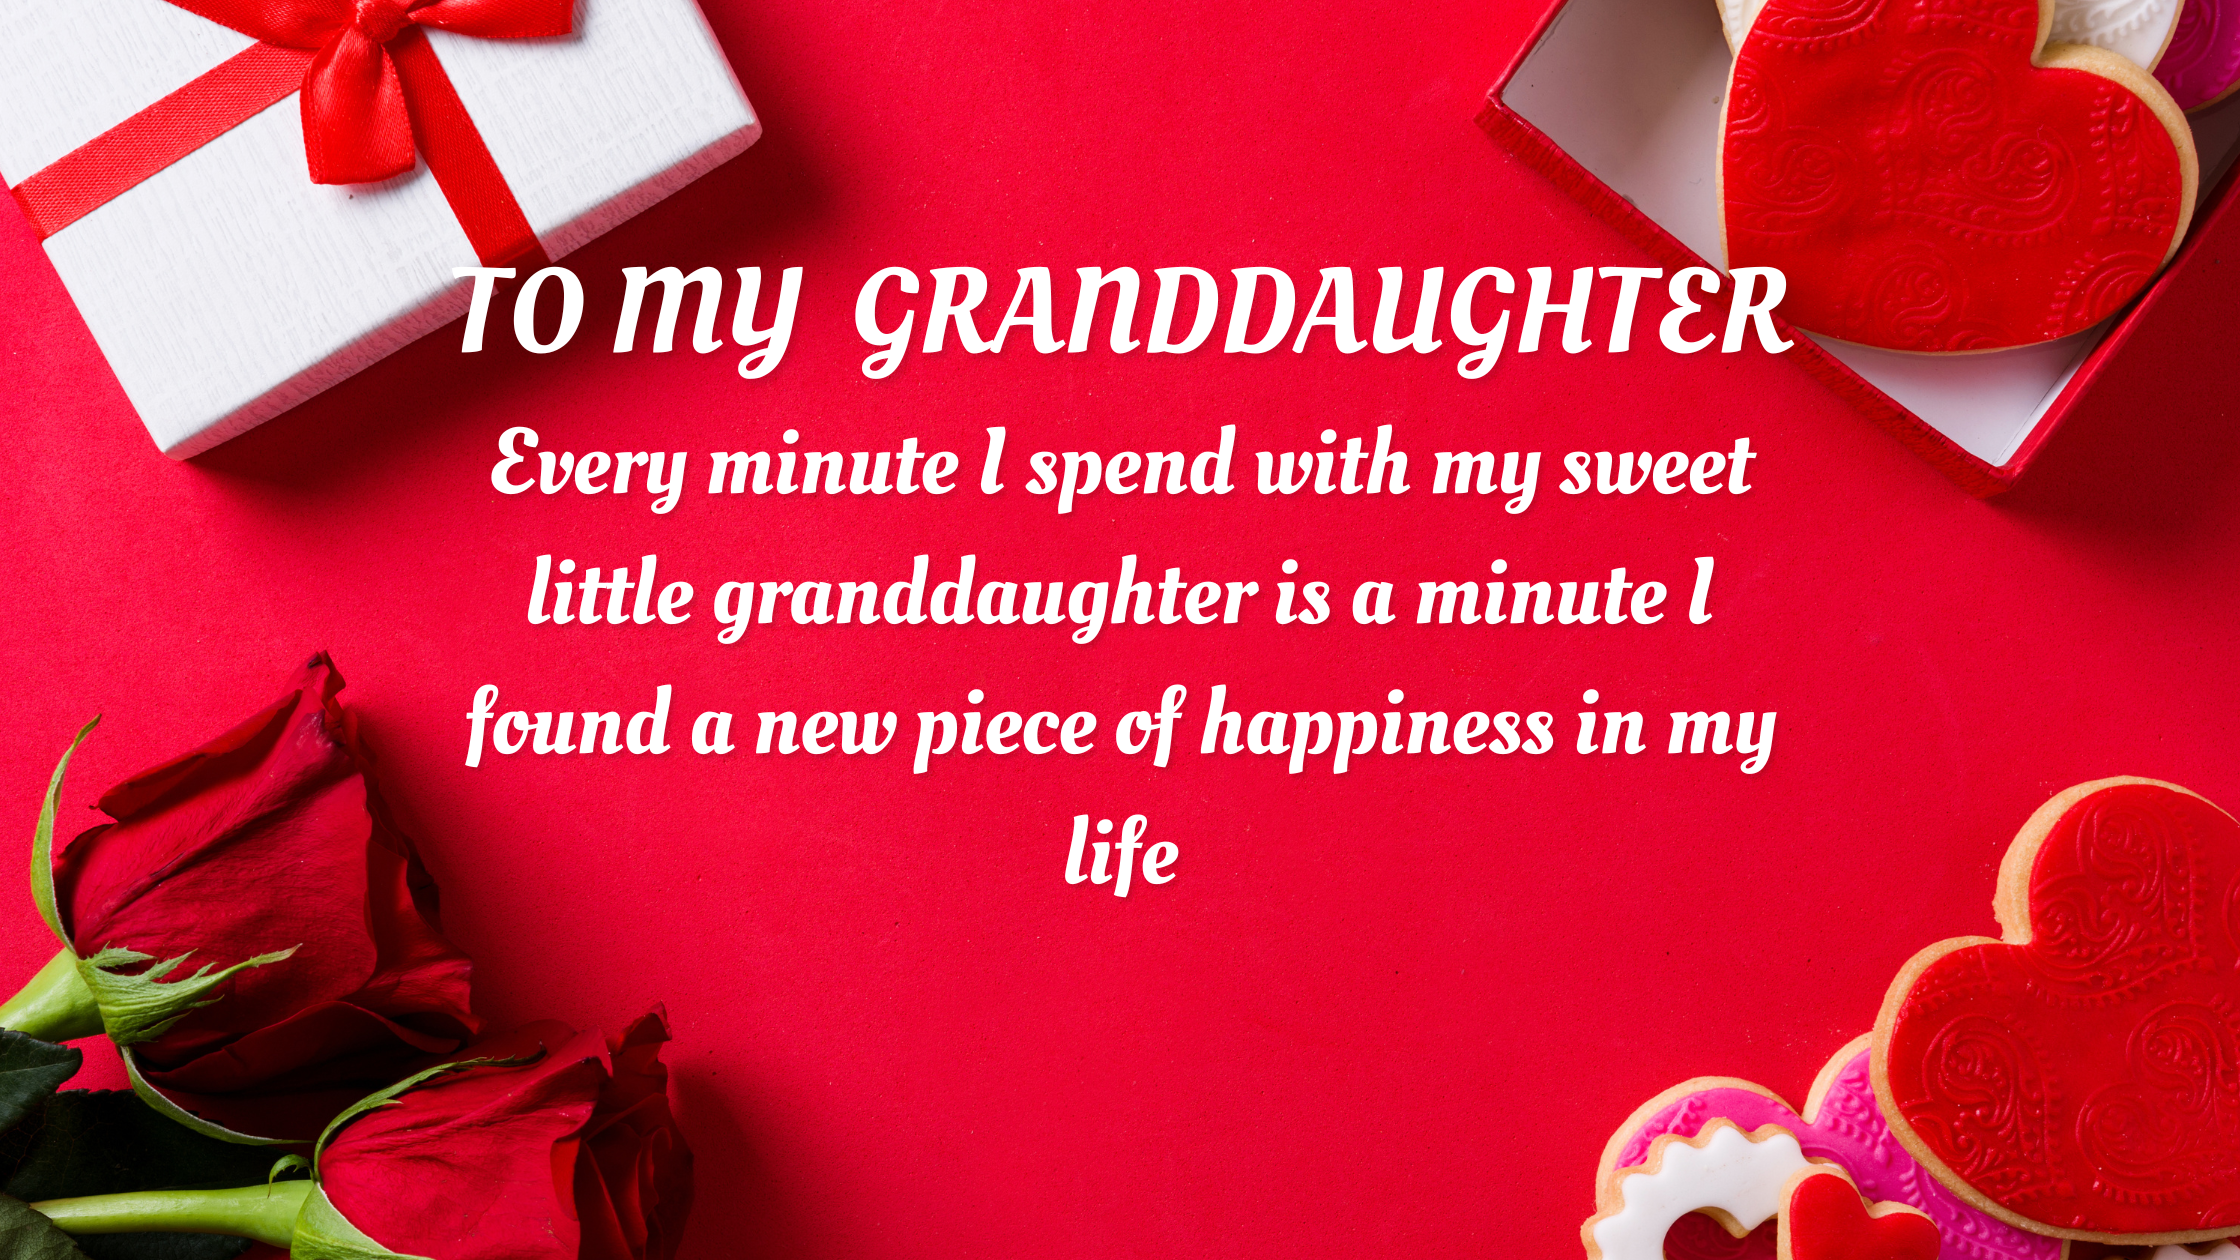 10 Heartwarming Short Granddaughter Quotes from My Heart